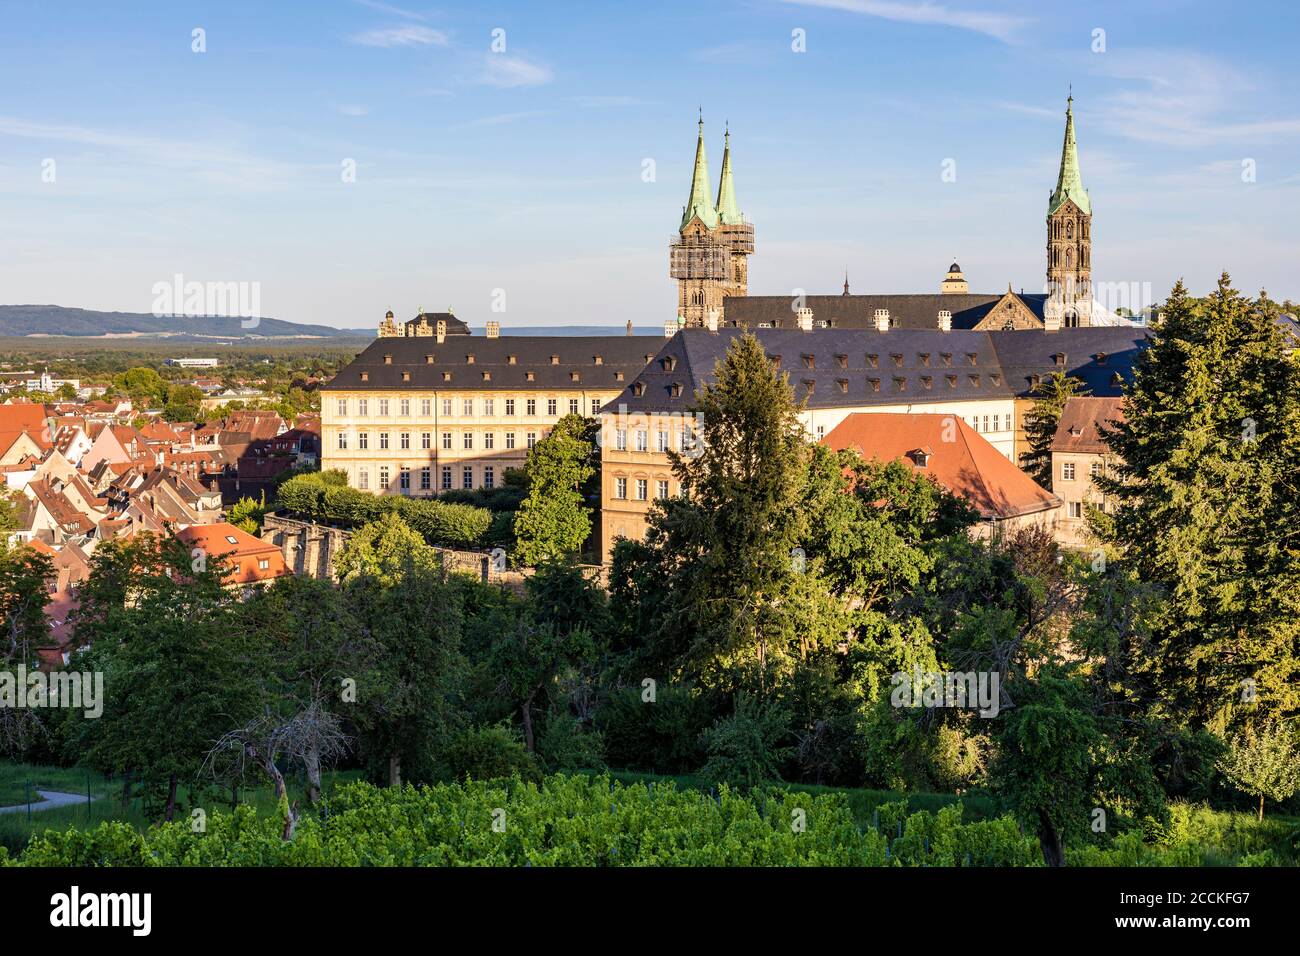 Germany, Bavaria, Bamberg, Bamberg Cathedral and surrounding old town buildings at dusk Stock Photo